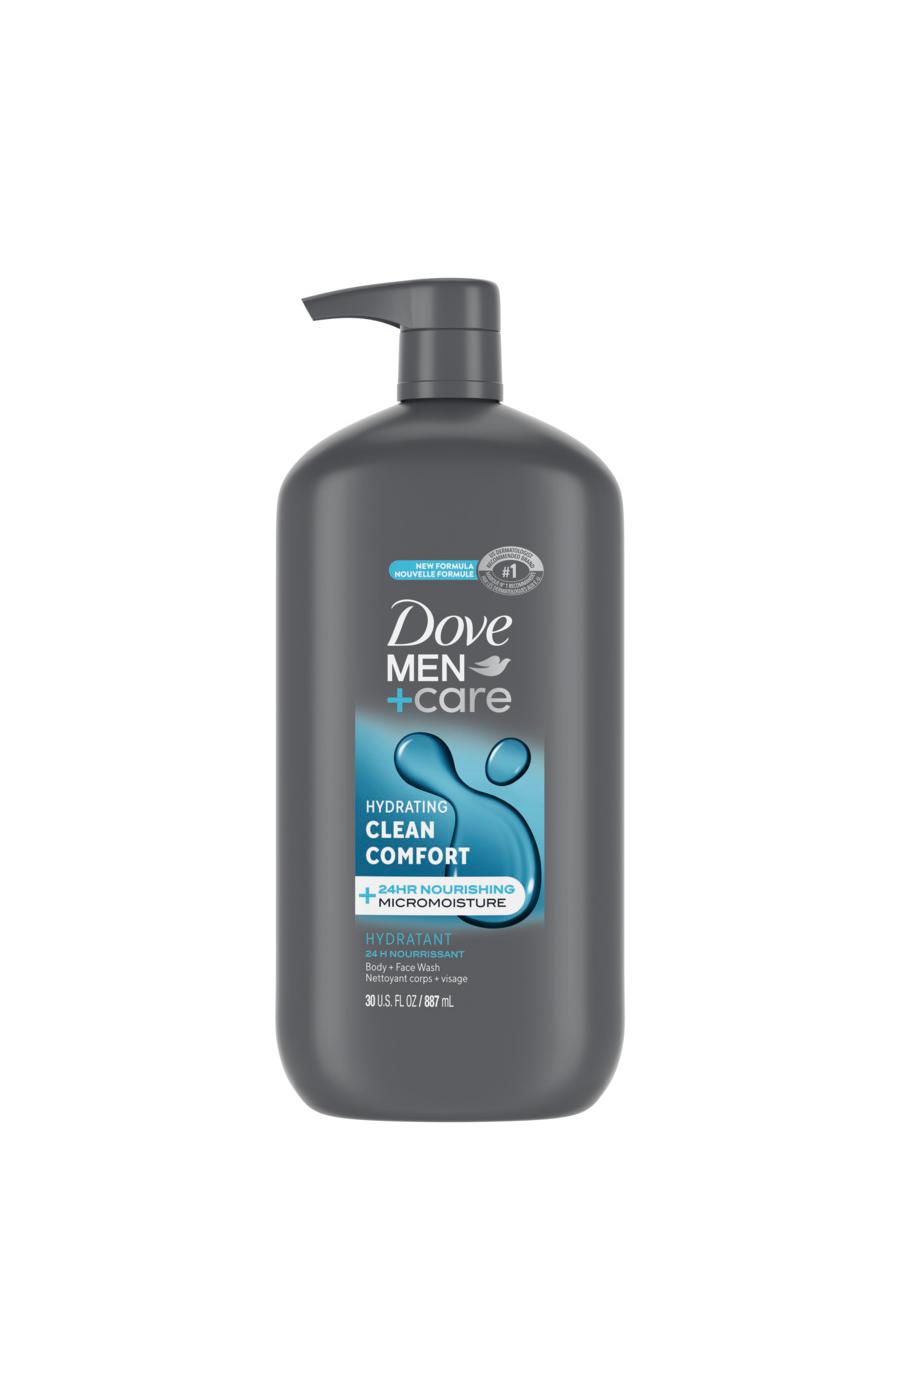 Dove Men+Care Hydrating Body + Face Wash - Clean Comfort; image 1 of 6